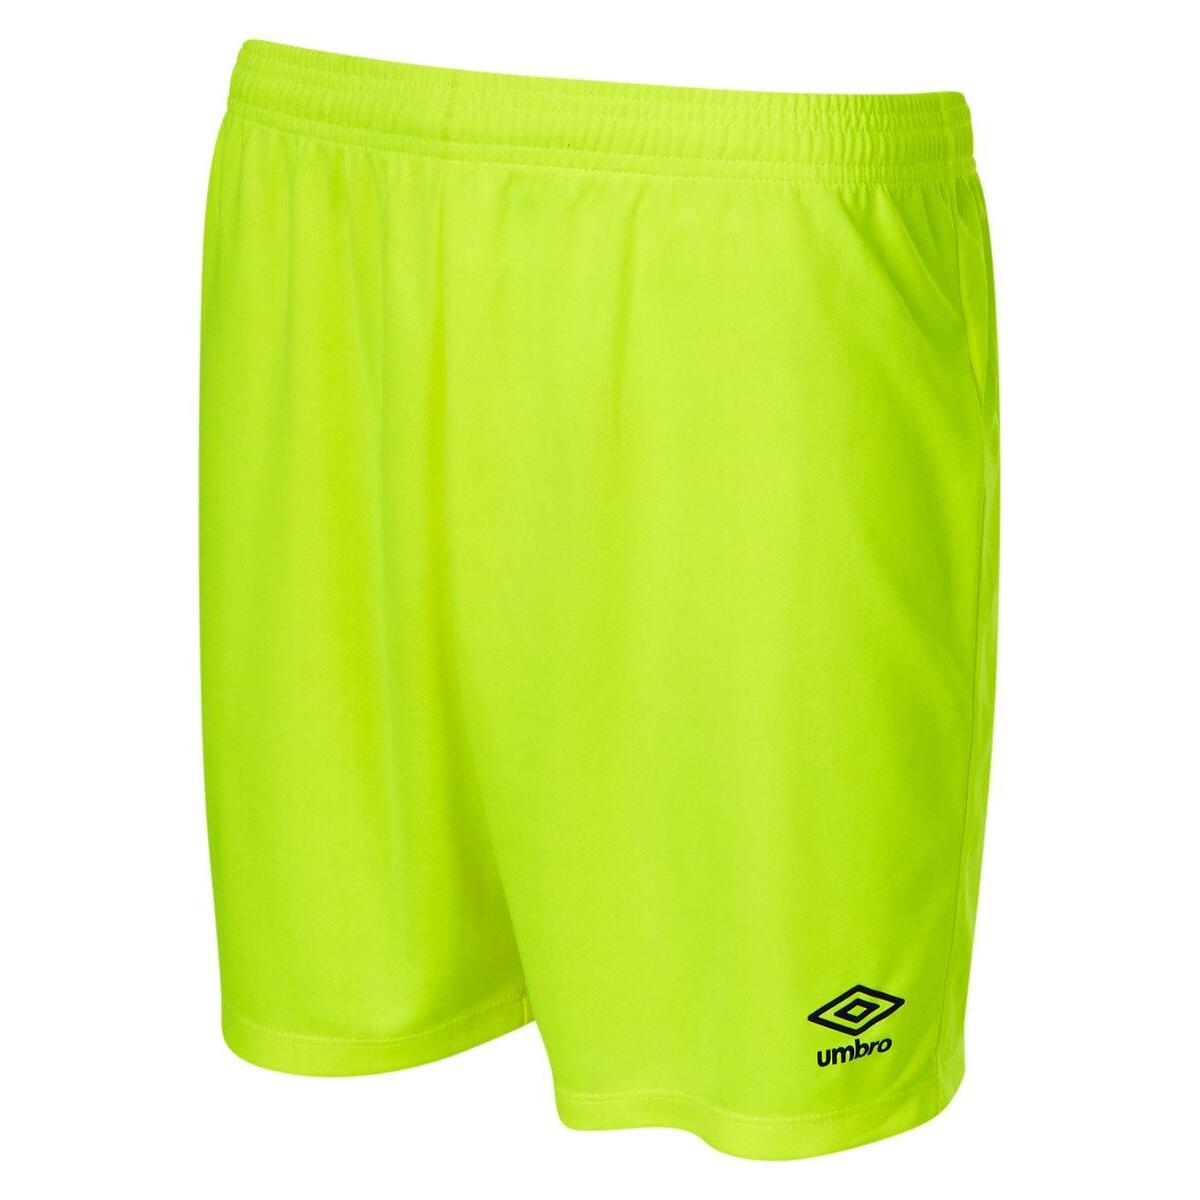 UMBRO Mens Club II Shorts (Safety Yellow/Carbon)